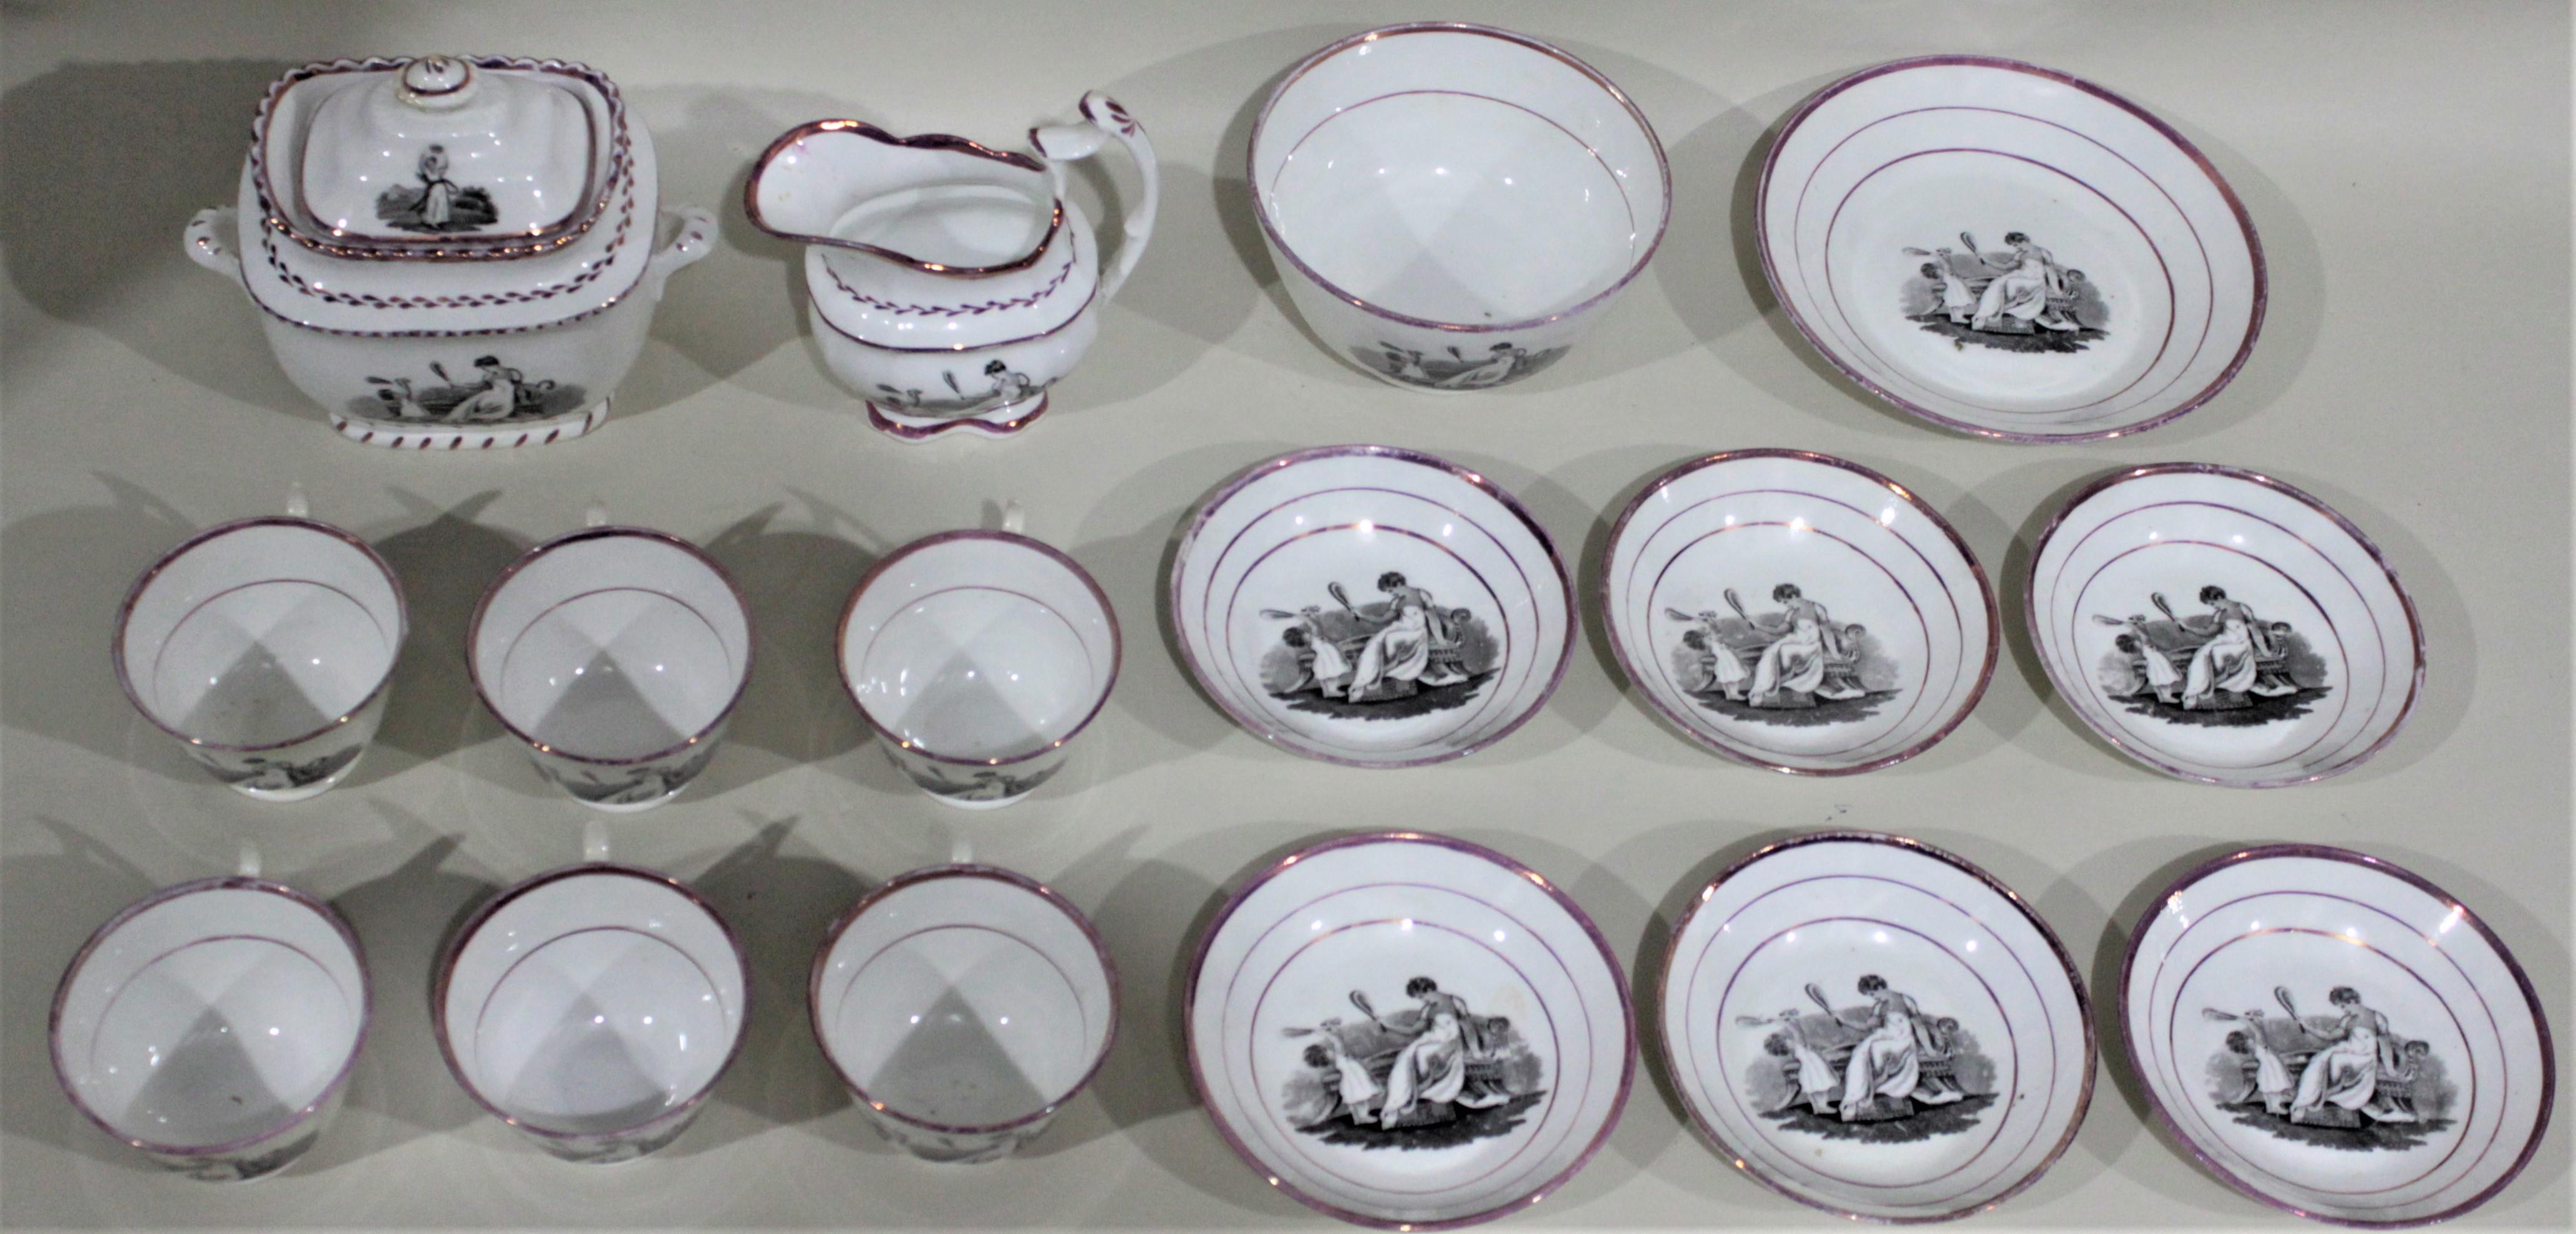 This early Victorian partial desert or luncheon set has no maker's markings, but it believed to have been made in England in circa 1850. This set includes 16 pieces in total comprised of two large serving bowls, six small bowls, six cups and a